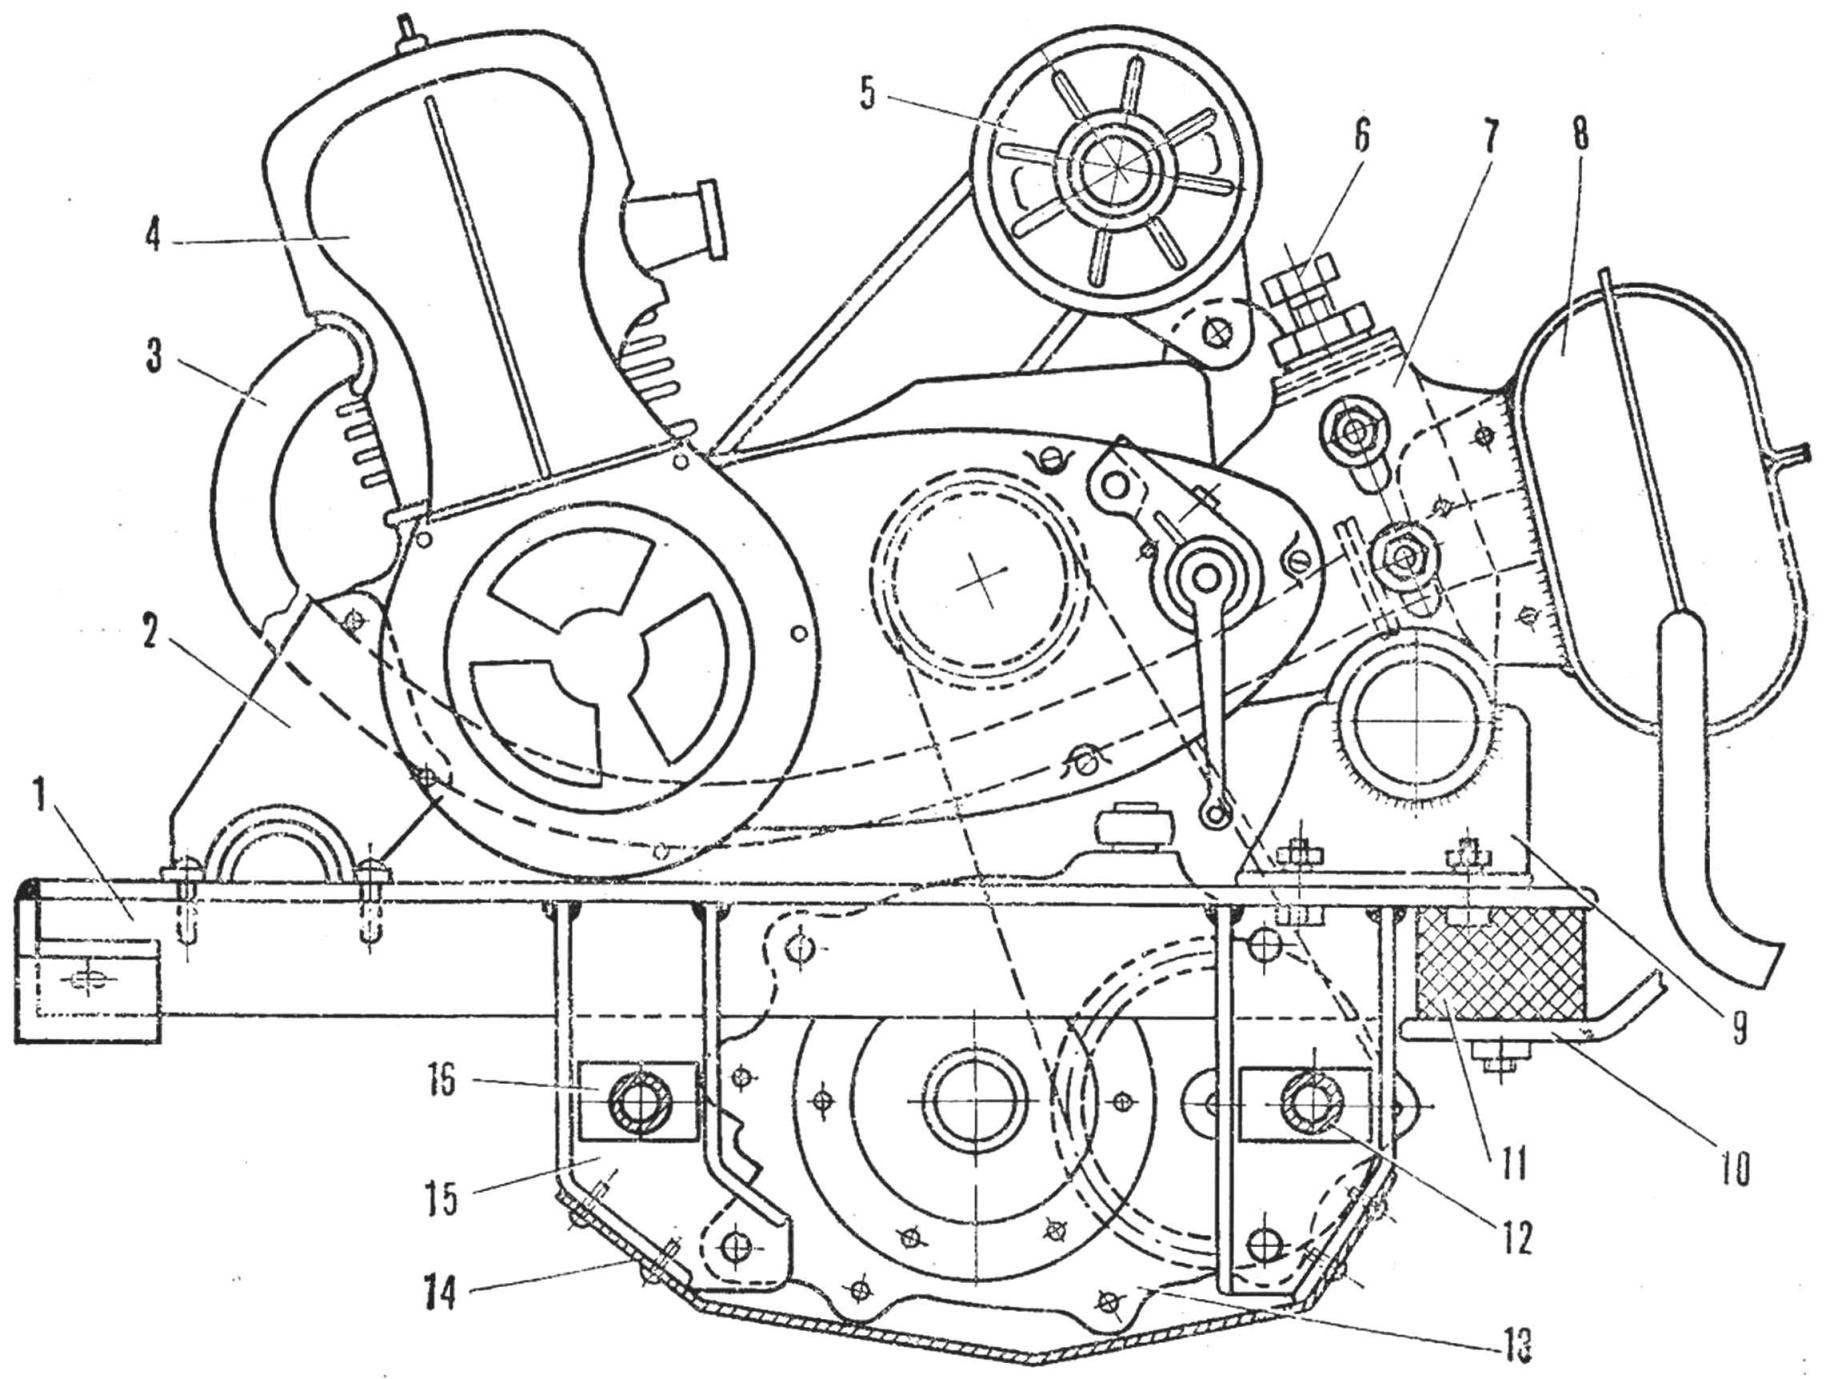 Fig. 4. The location of the engine and the main transmission on the subframe (side view) and basic details